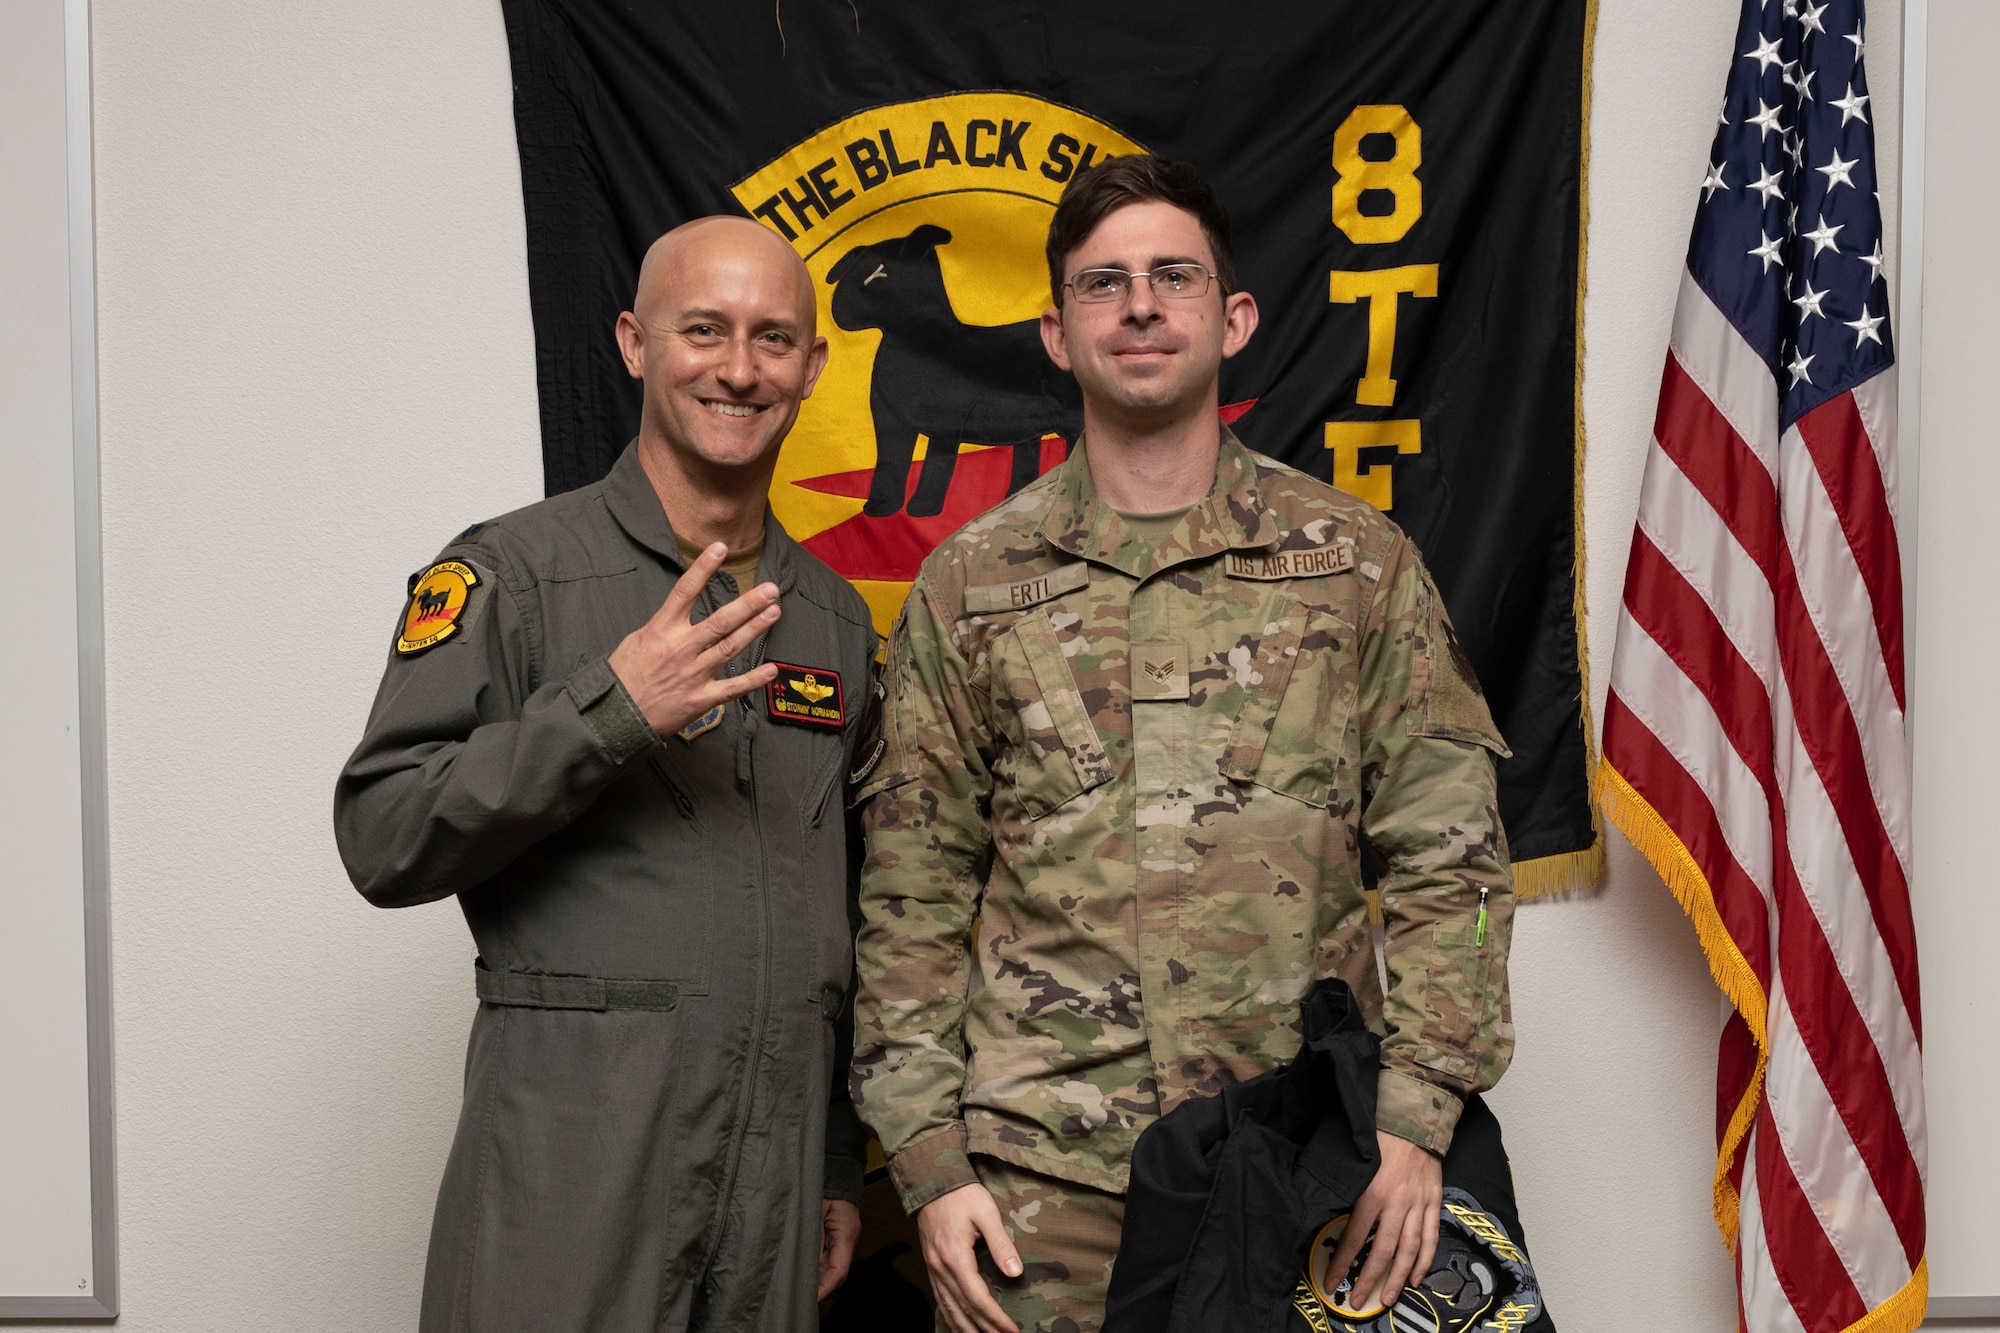 U.S. Air Force Senior Airman Luke Ertl, 8th Aircraft Maintenance Unit crew chief, right, poses for a photo with U.S. Air Force Lt. Col. George Normandin, 8th Fighter Squadron commander, during a Dedicated Crew Chief Appointment ceremony at Holloman Air Force Base, New Mexico, Jan. 3, 2022. To receive the title of DCC, a crew chief must demonstrate a history of superior performance in their career, comply with all safety practices and complete all required training. (U.S. Air Force photo by Senior Airman Antonio Salfran)